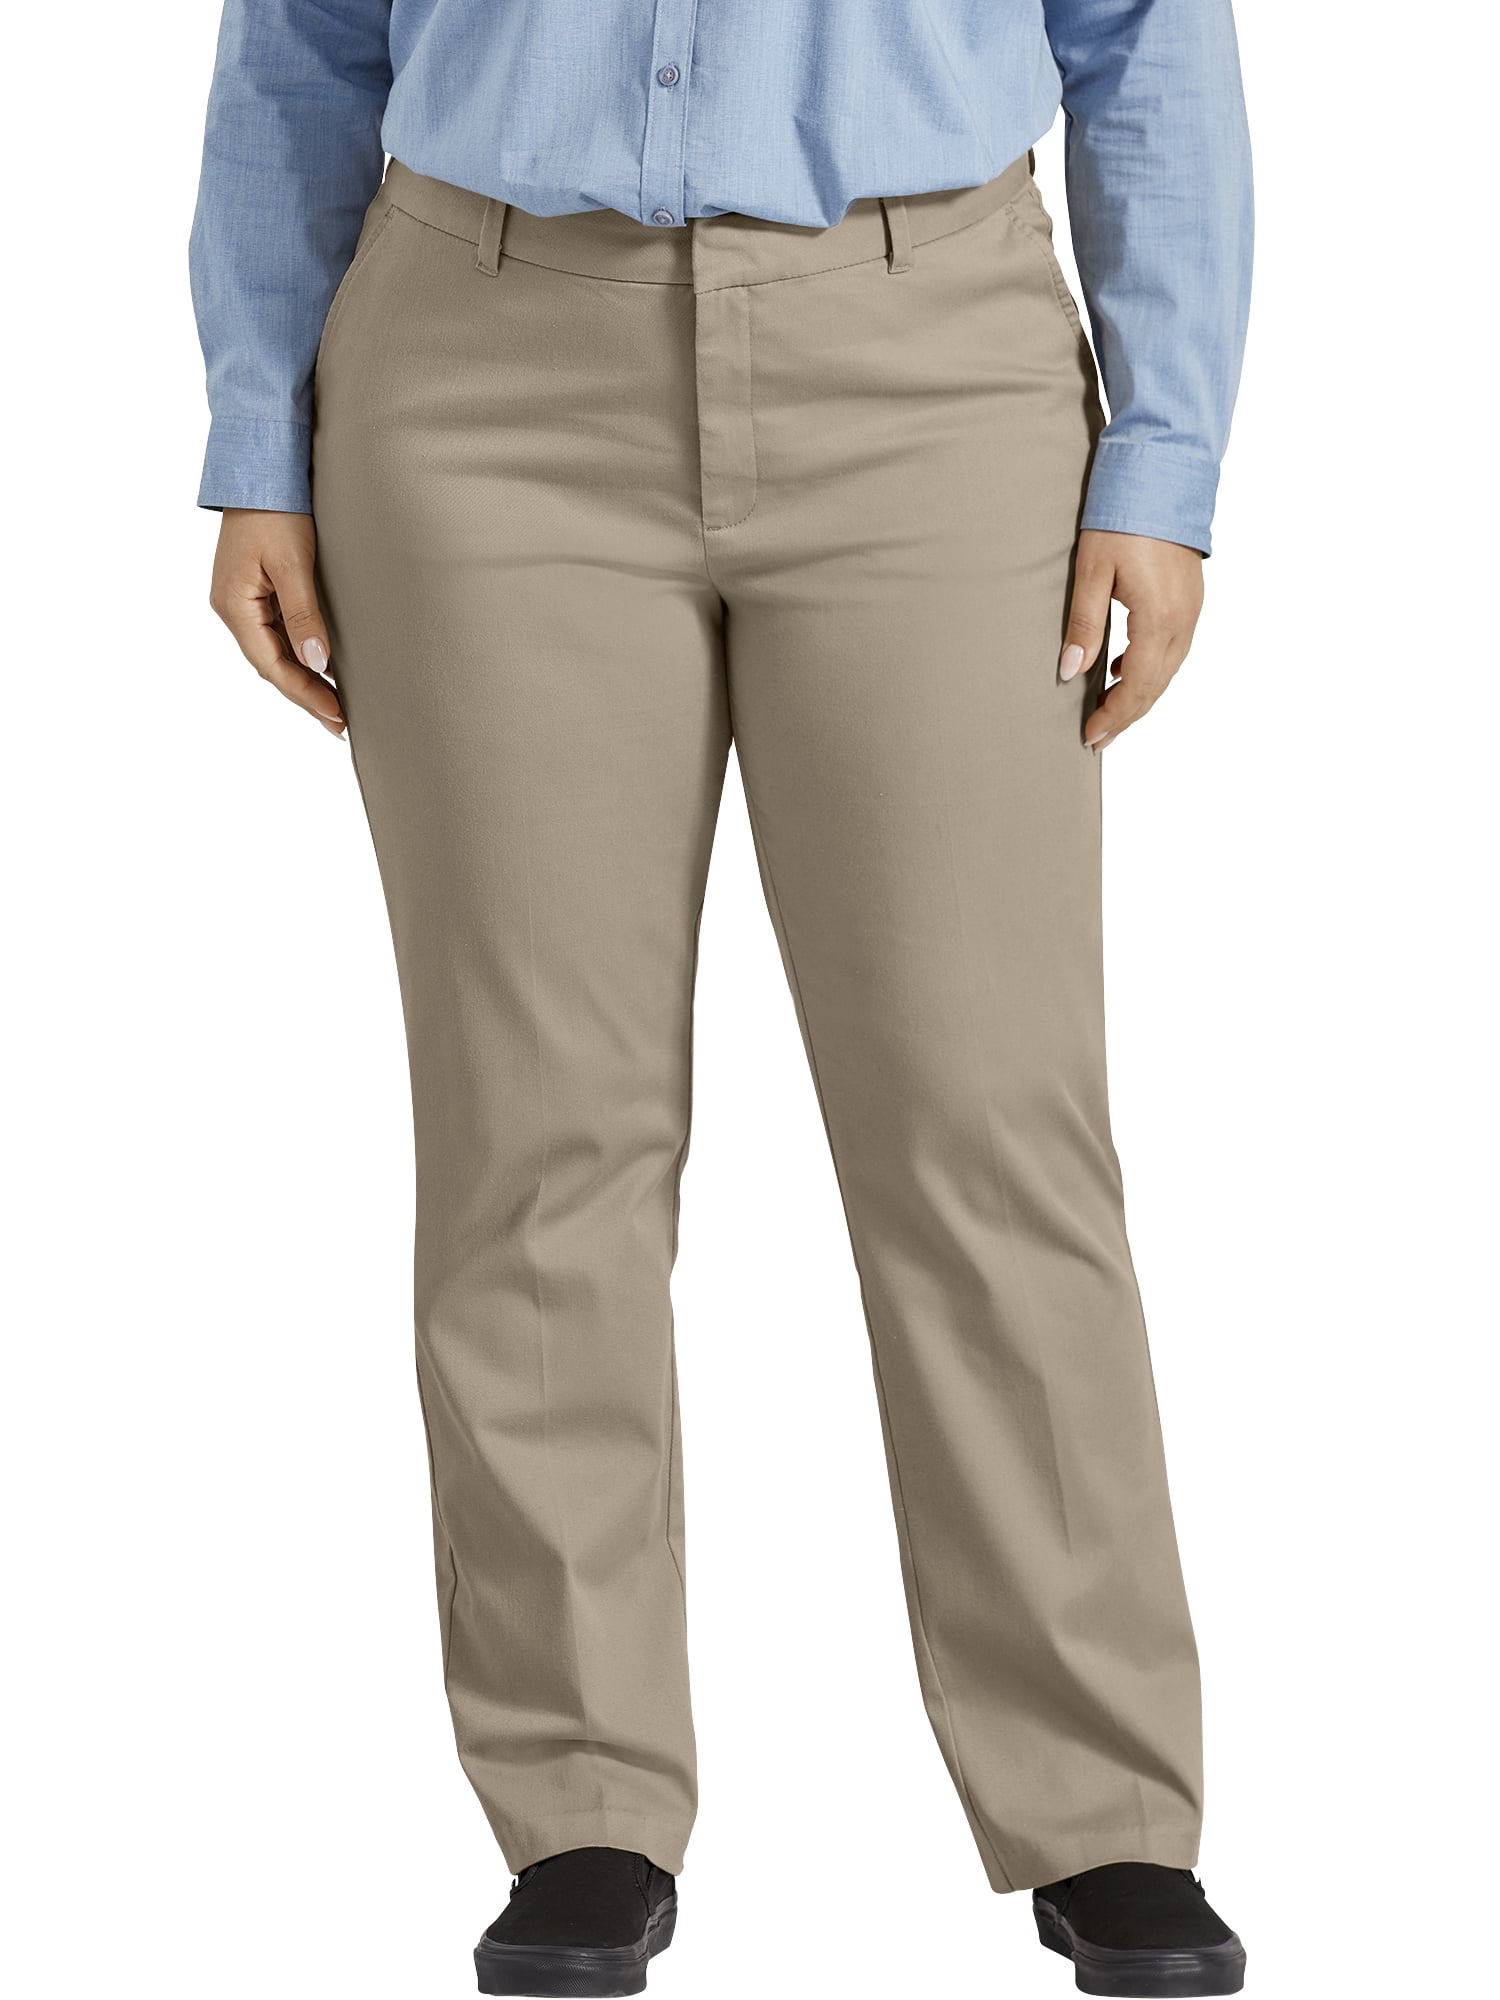 Dickies Women's Plus Size Perfectly Slimming Straight Pant - Walmart.com